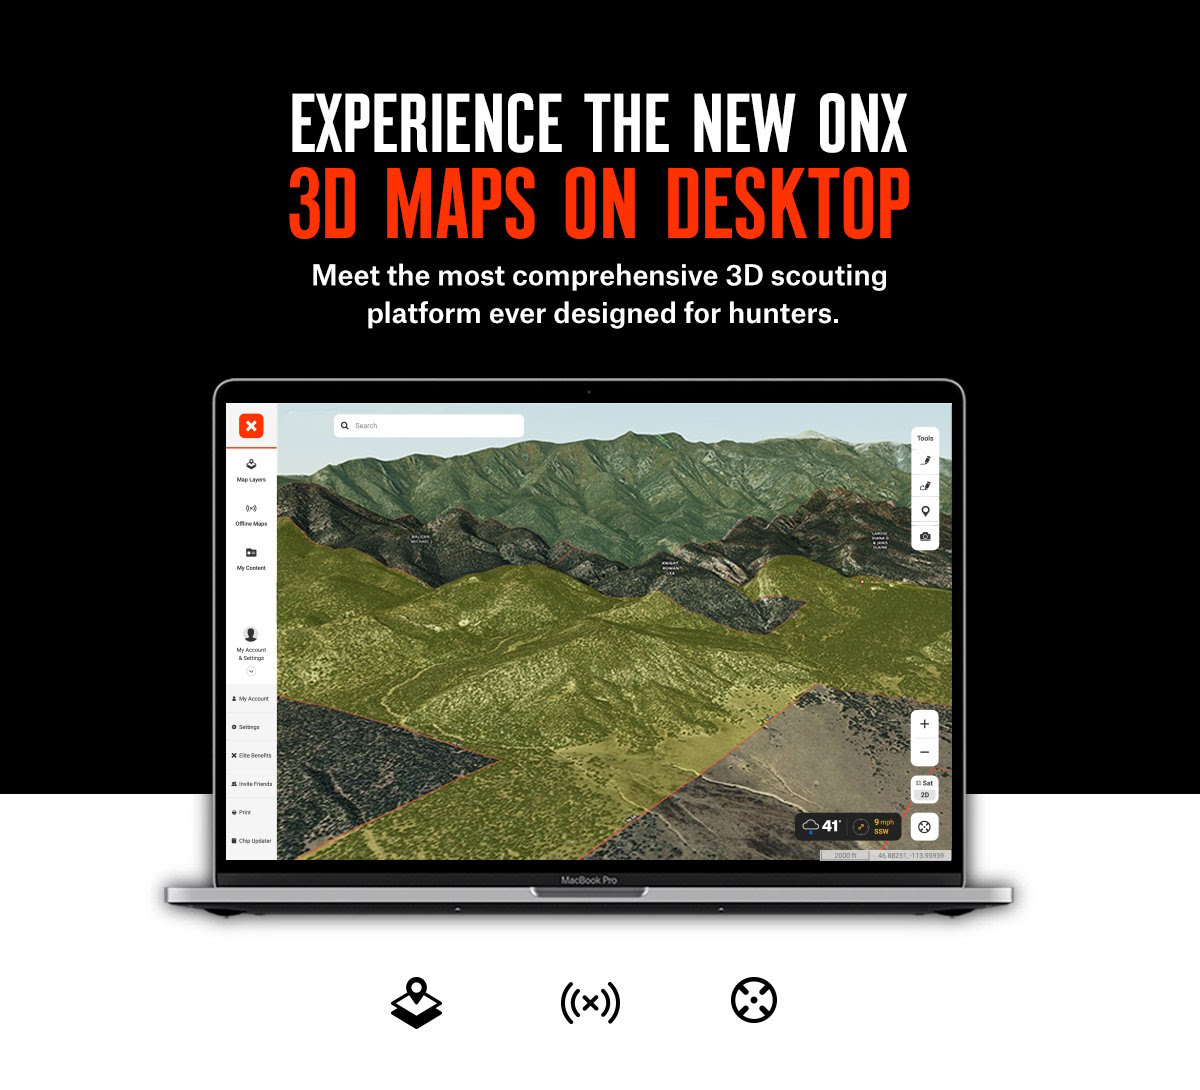 Experience the new onx 3D maps on Desktop